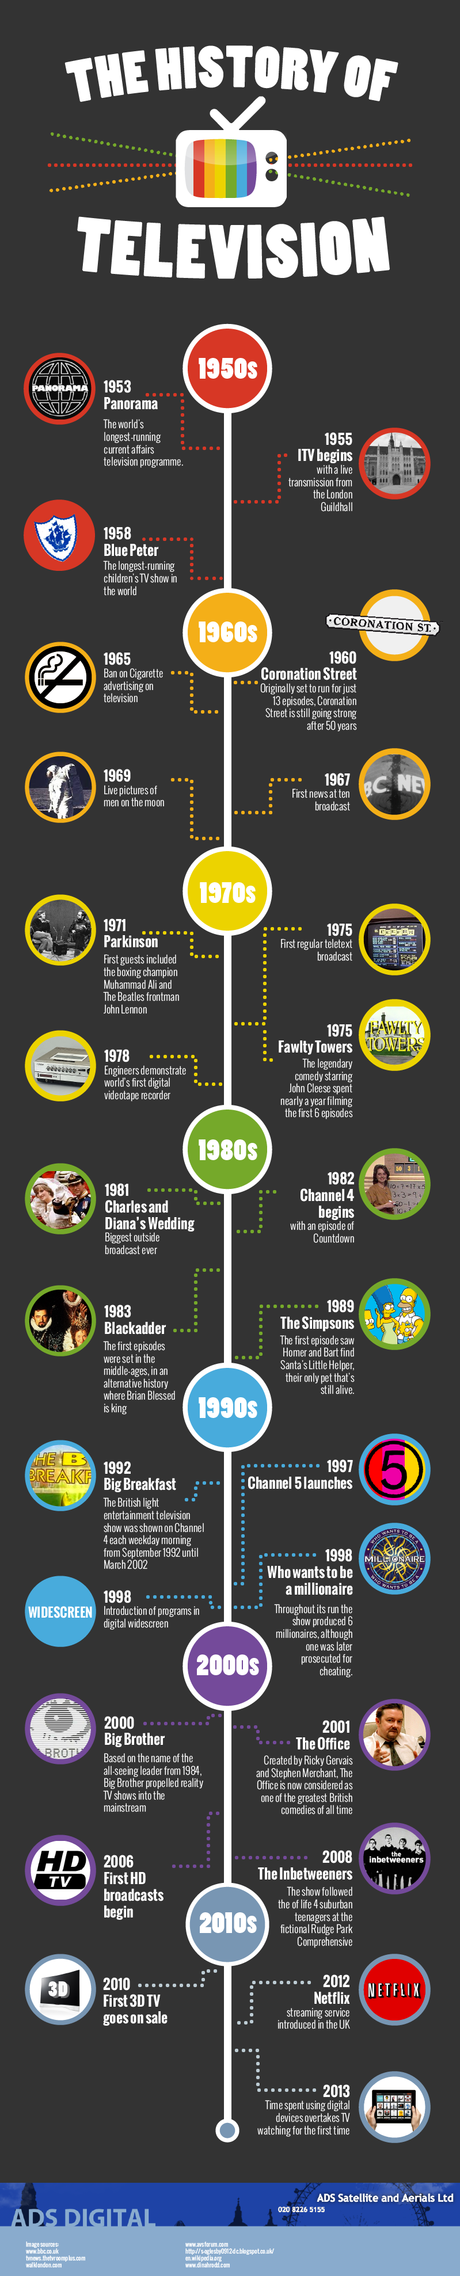 The Historic Timeline of Television Infographic